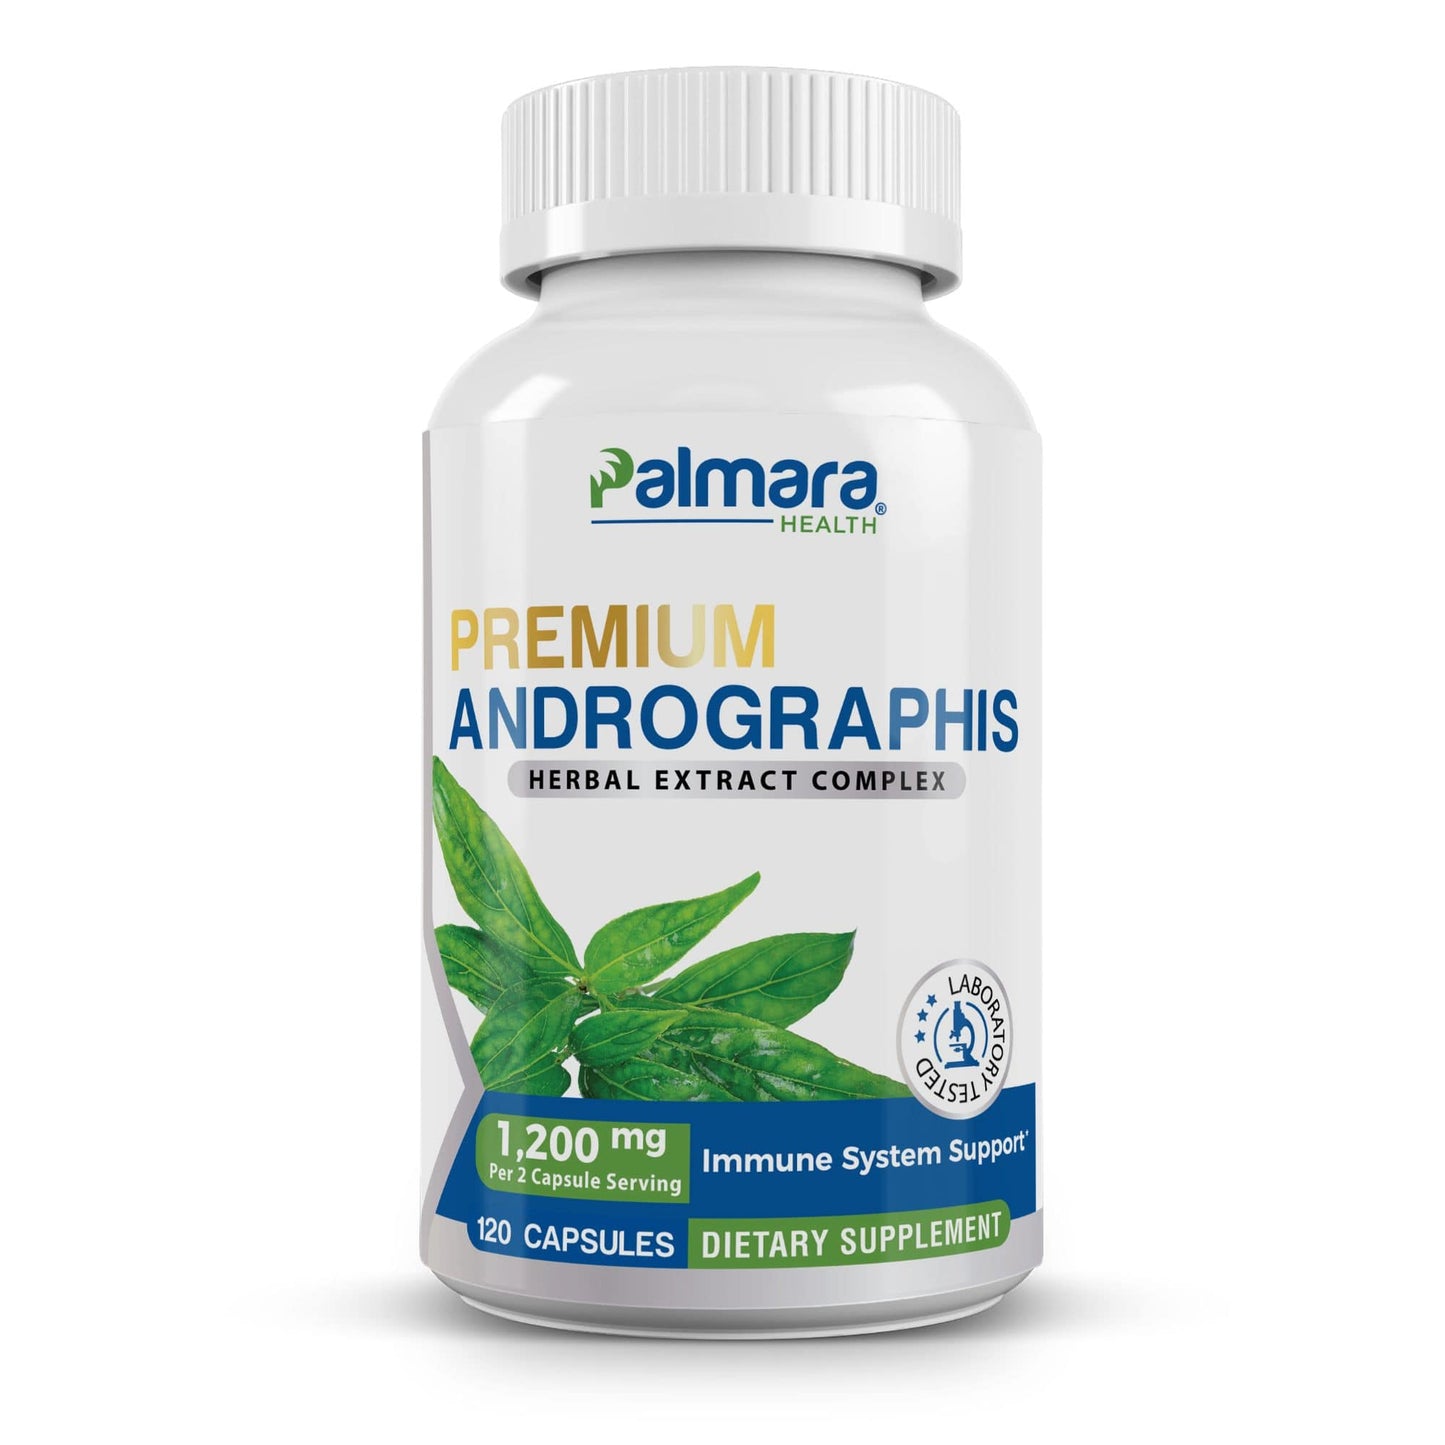 A Palmara Health branded bottle of Premium Andrographis herbal extract complex, prominently displaying the 1200 mg serving strength and its benefits for immune system support on the label.